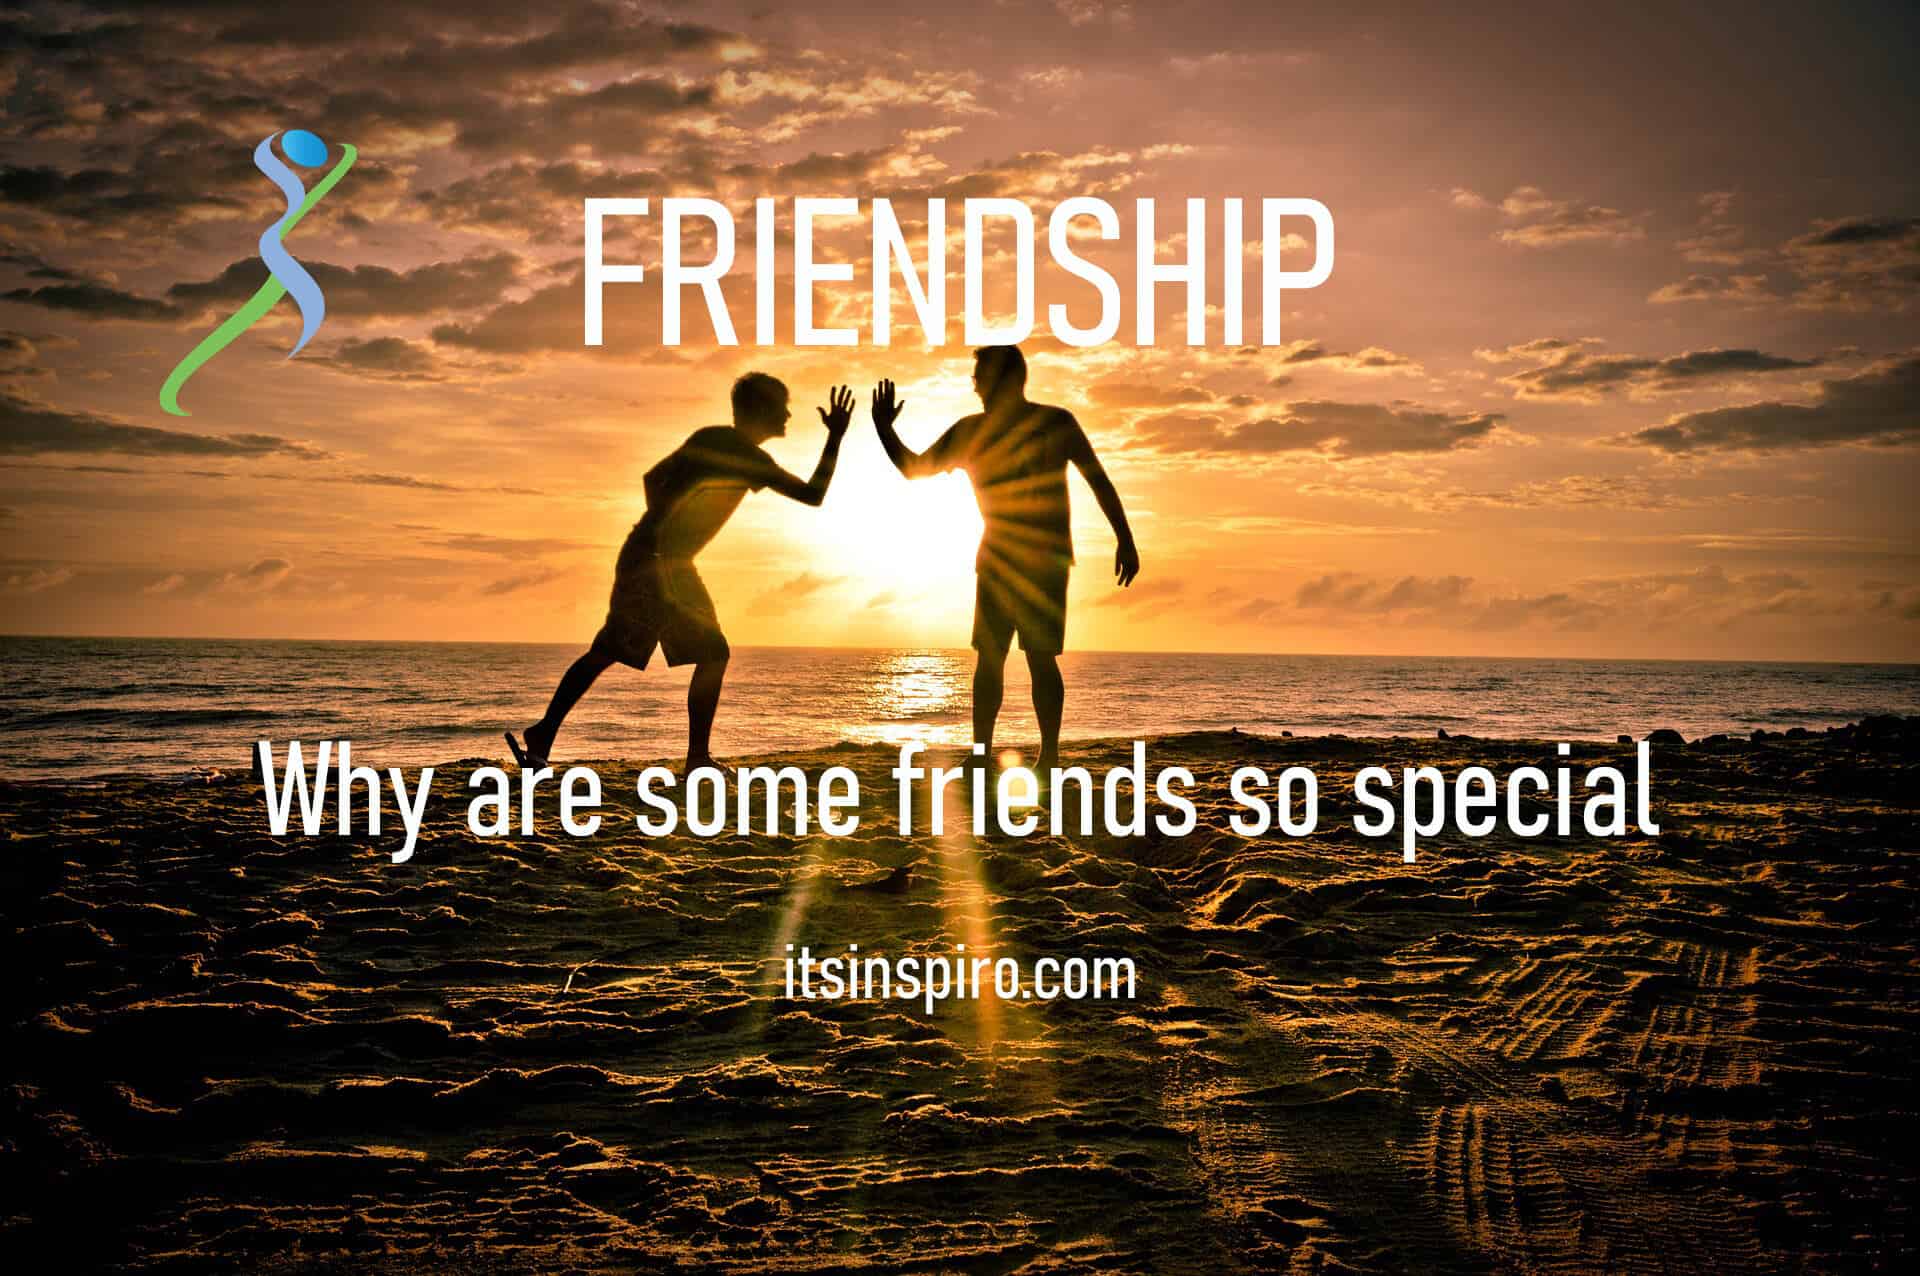 Friendship why are some friends so special? Friendship quotes